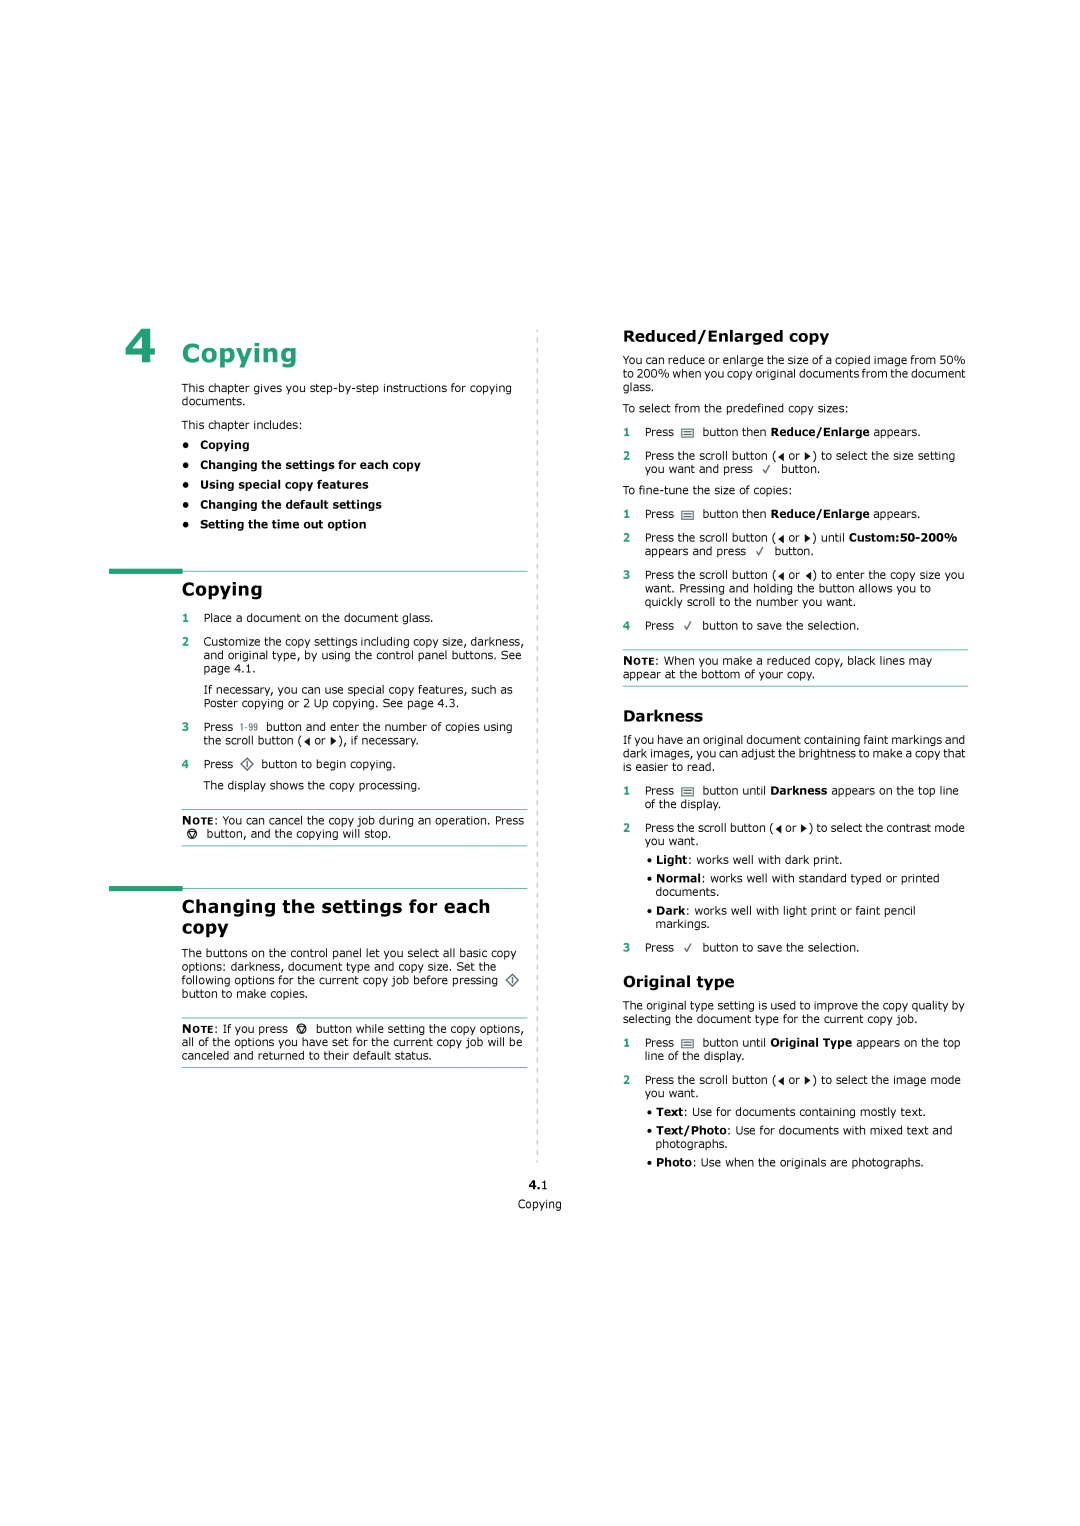 Xerox 3119 manual Copying, Changing the settings for each copy, Reduced/Enlarged copy, Darkness, Original type 